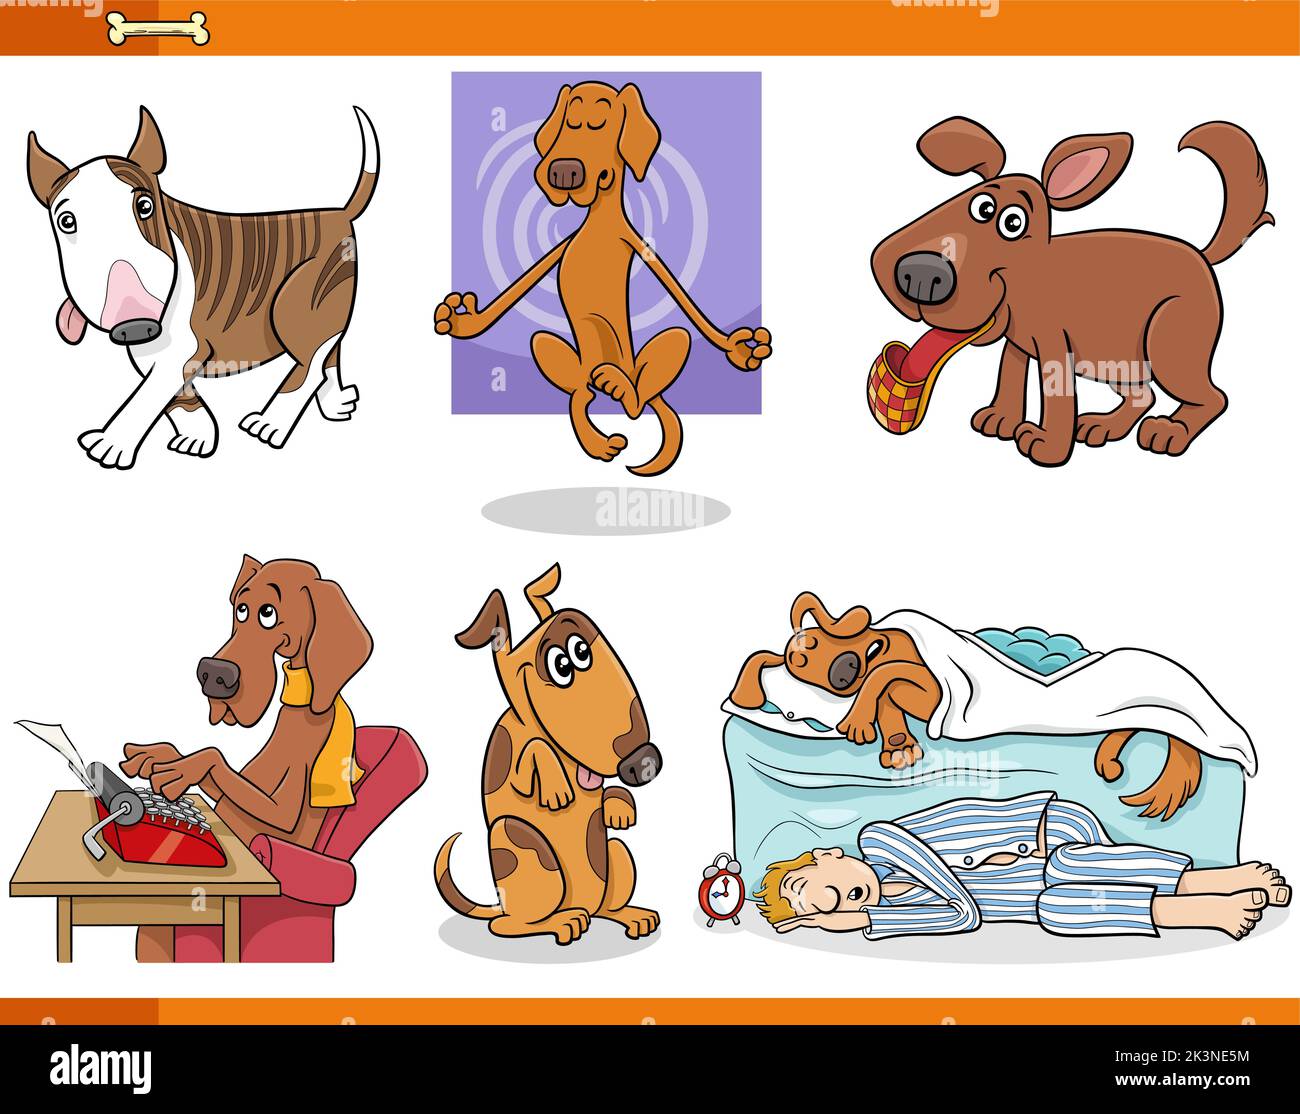 Cartoon illustration of funny dogs and puppies comic animal characters set Stock Vector